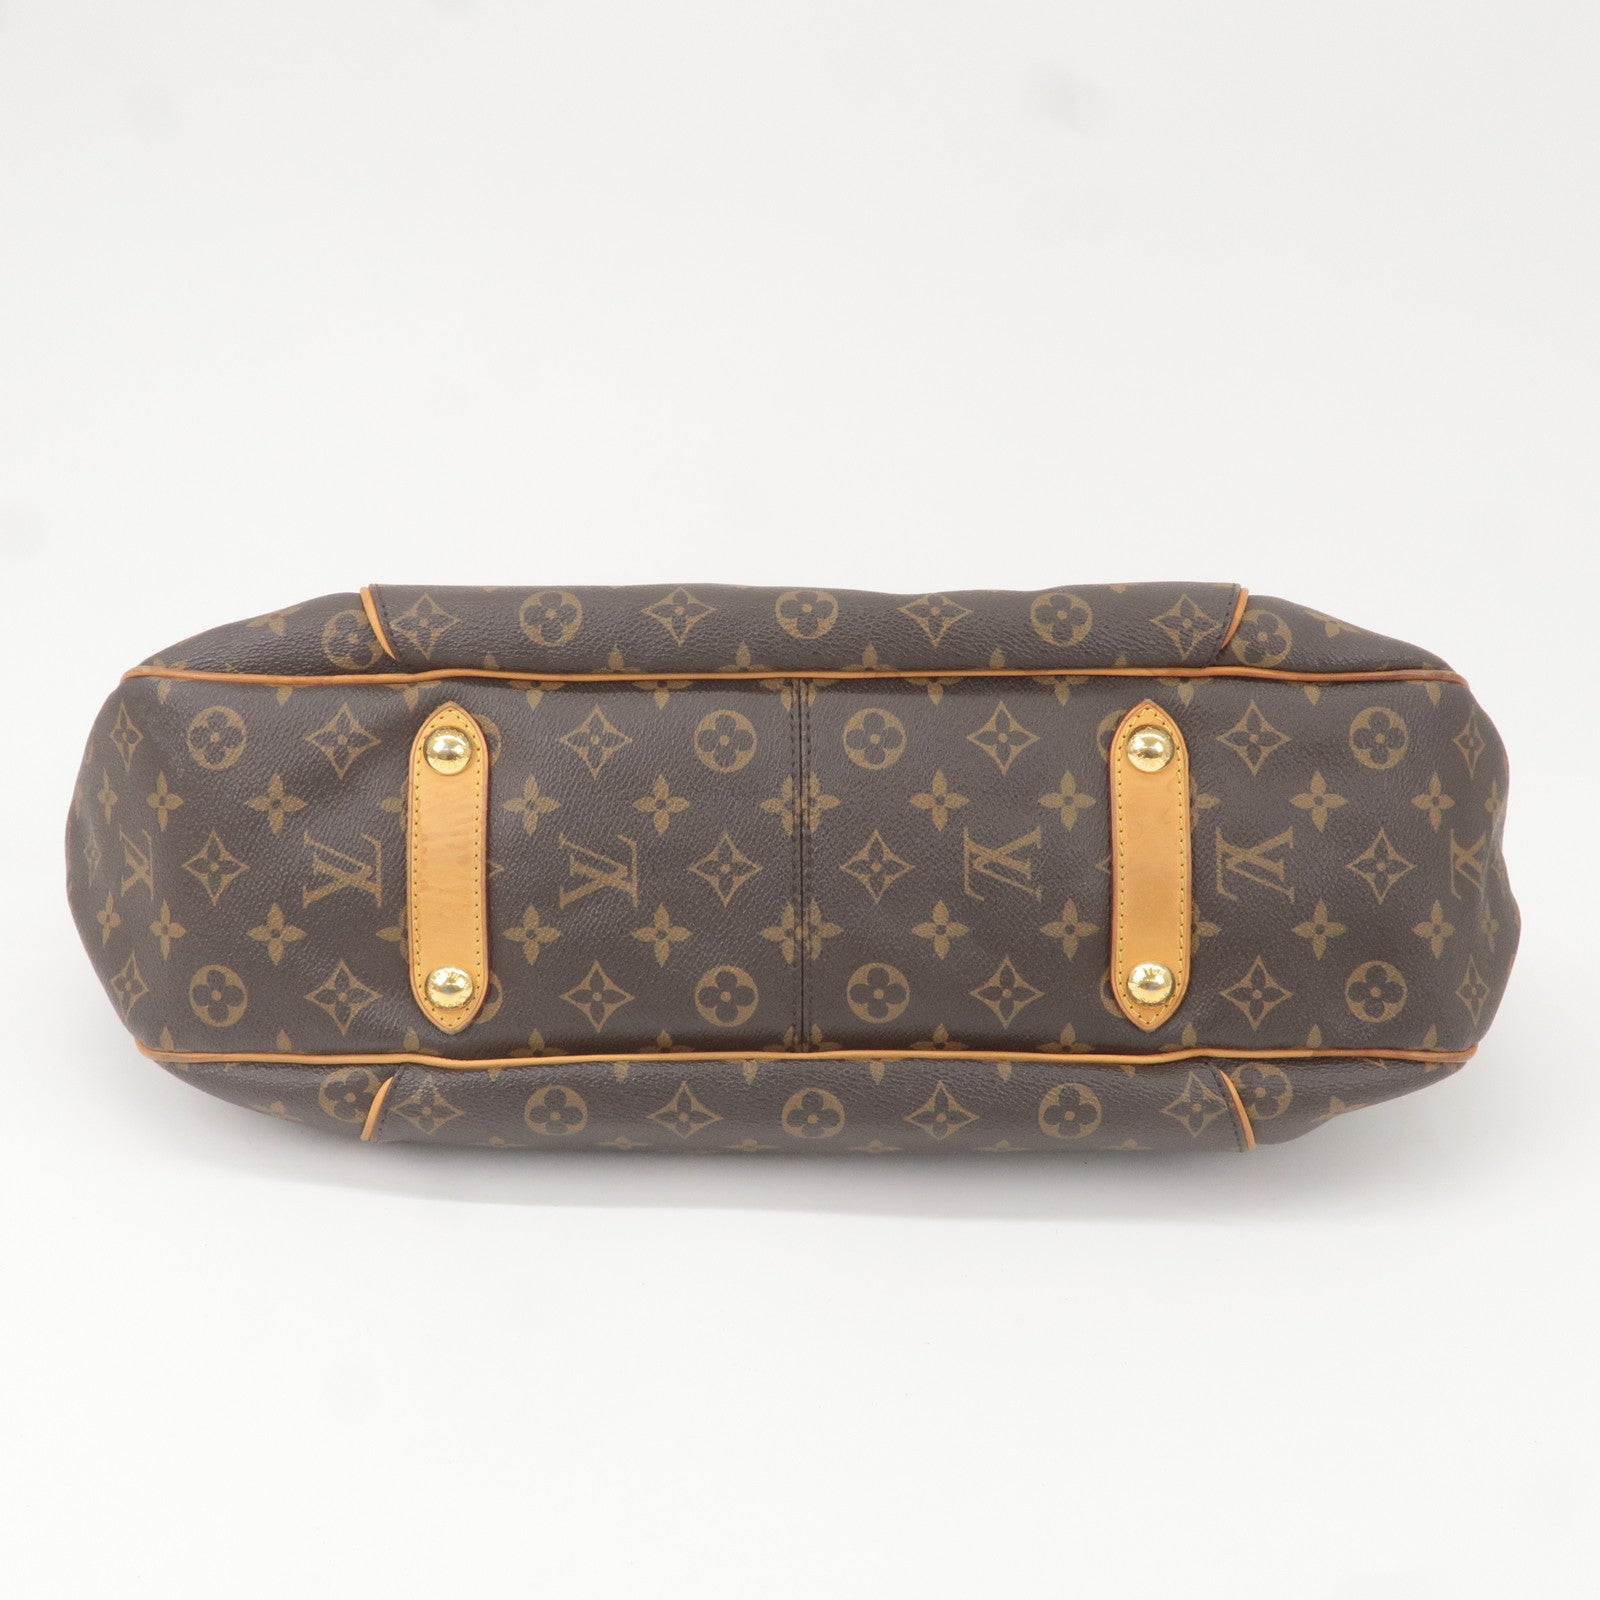 Sold Louis Vuitton Monogram Canvas Galliera (knock off) GM M56381 Includes  Dust Cover & Manufacturers Date Code